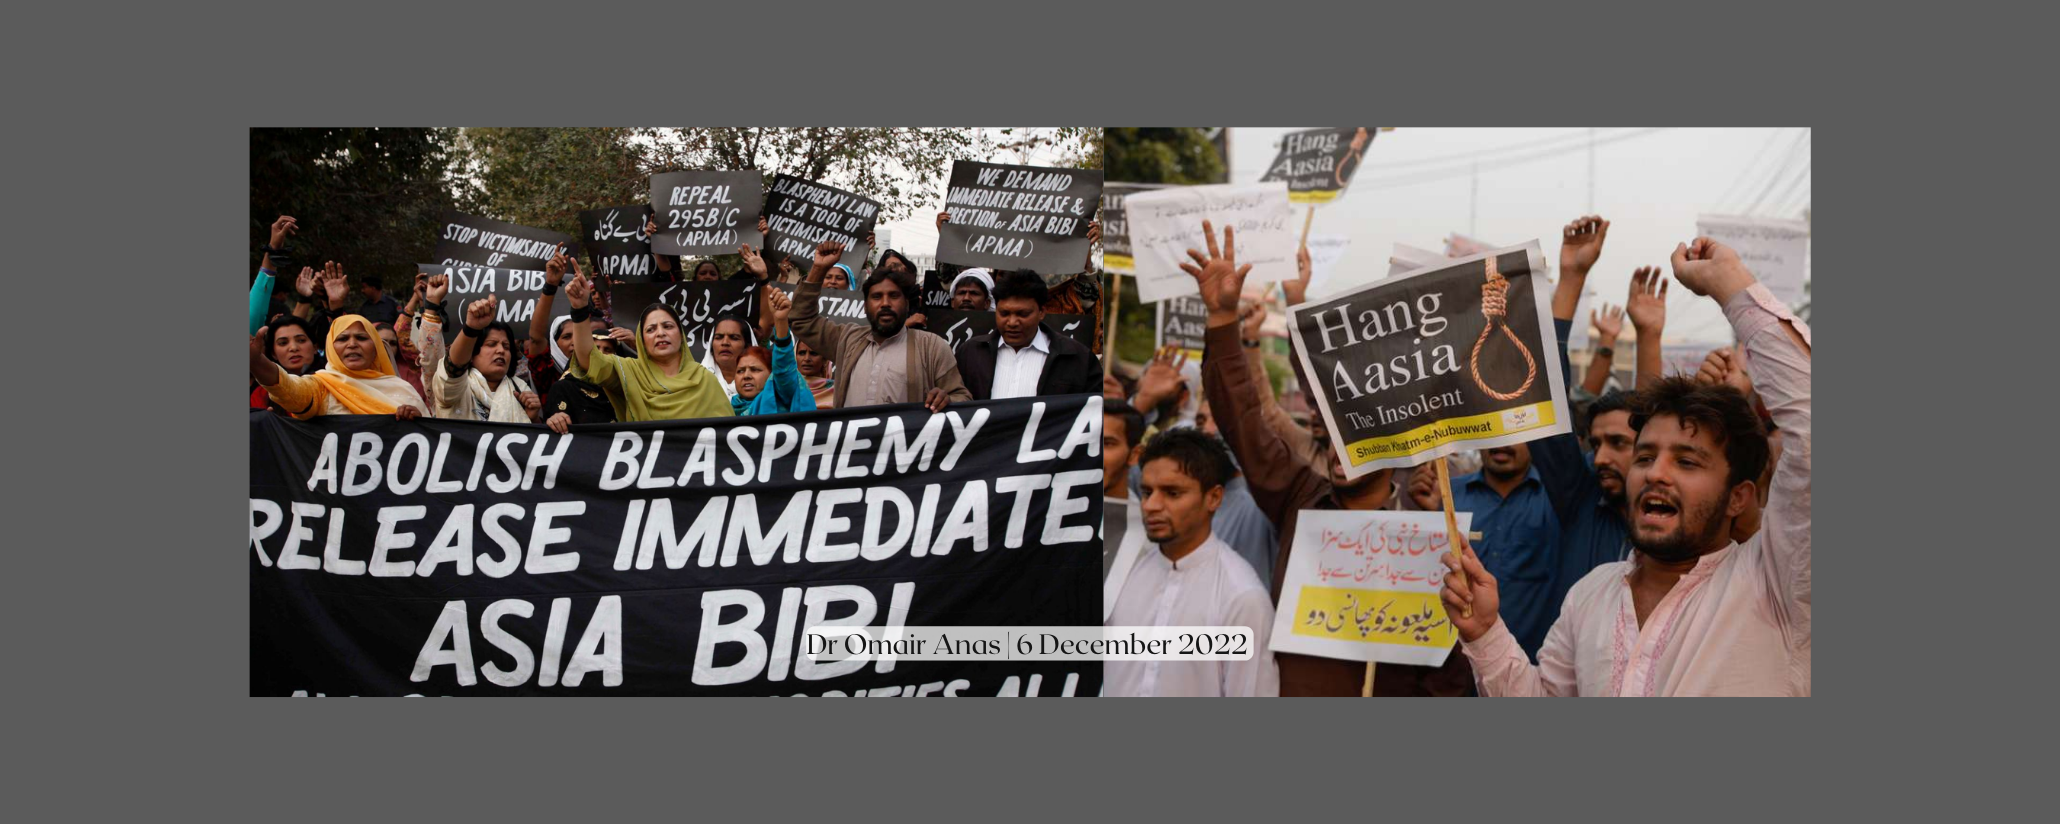 Asia Bibi Exonerated, But Scope for Misuse of Blasphemy Law Remains Challenge for Pakistan